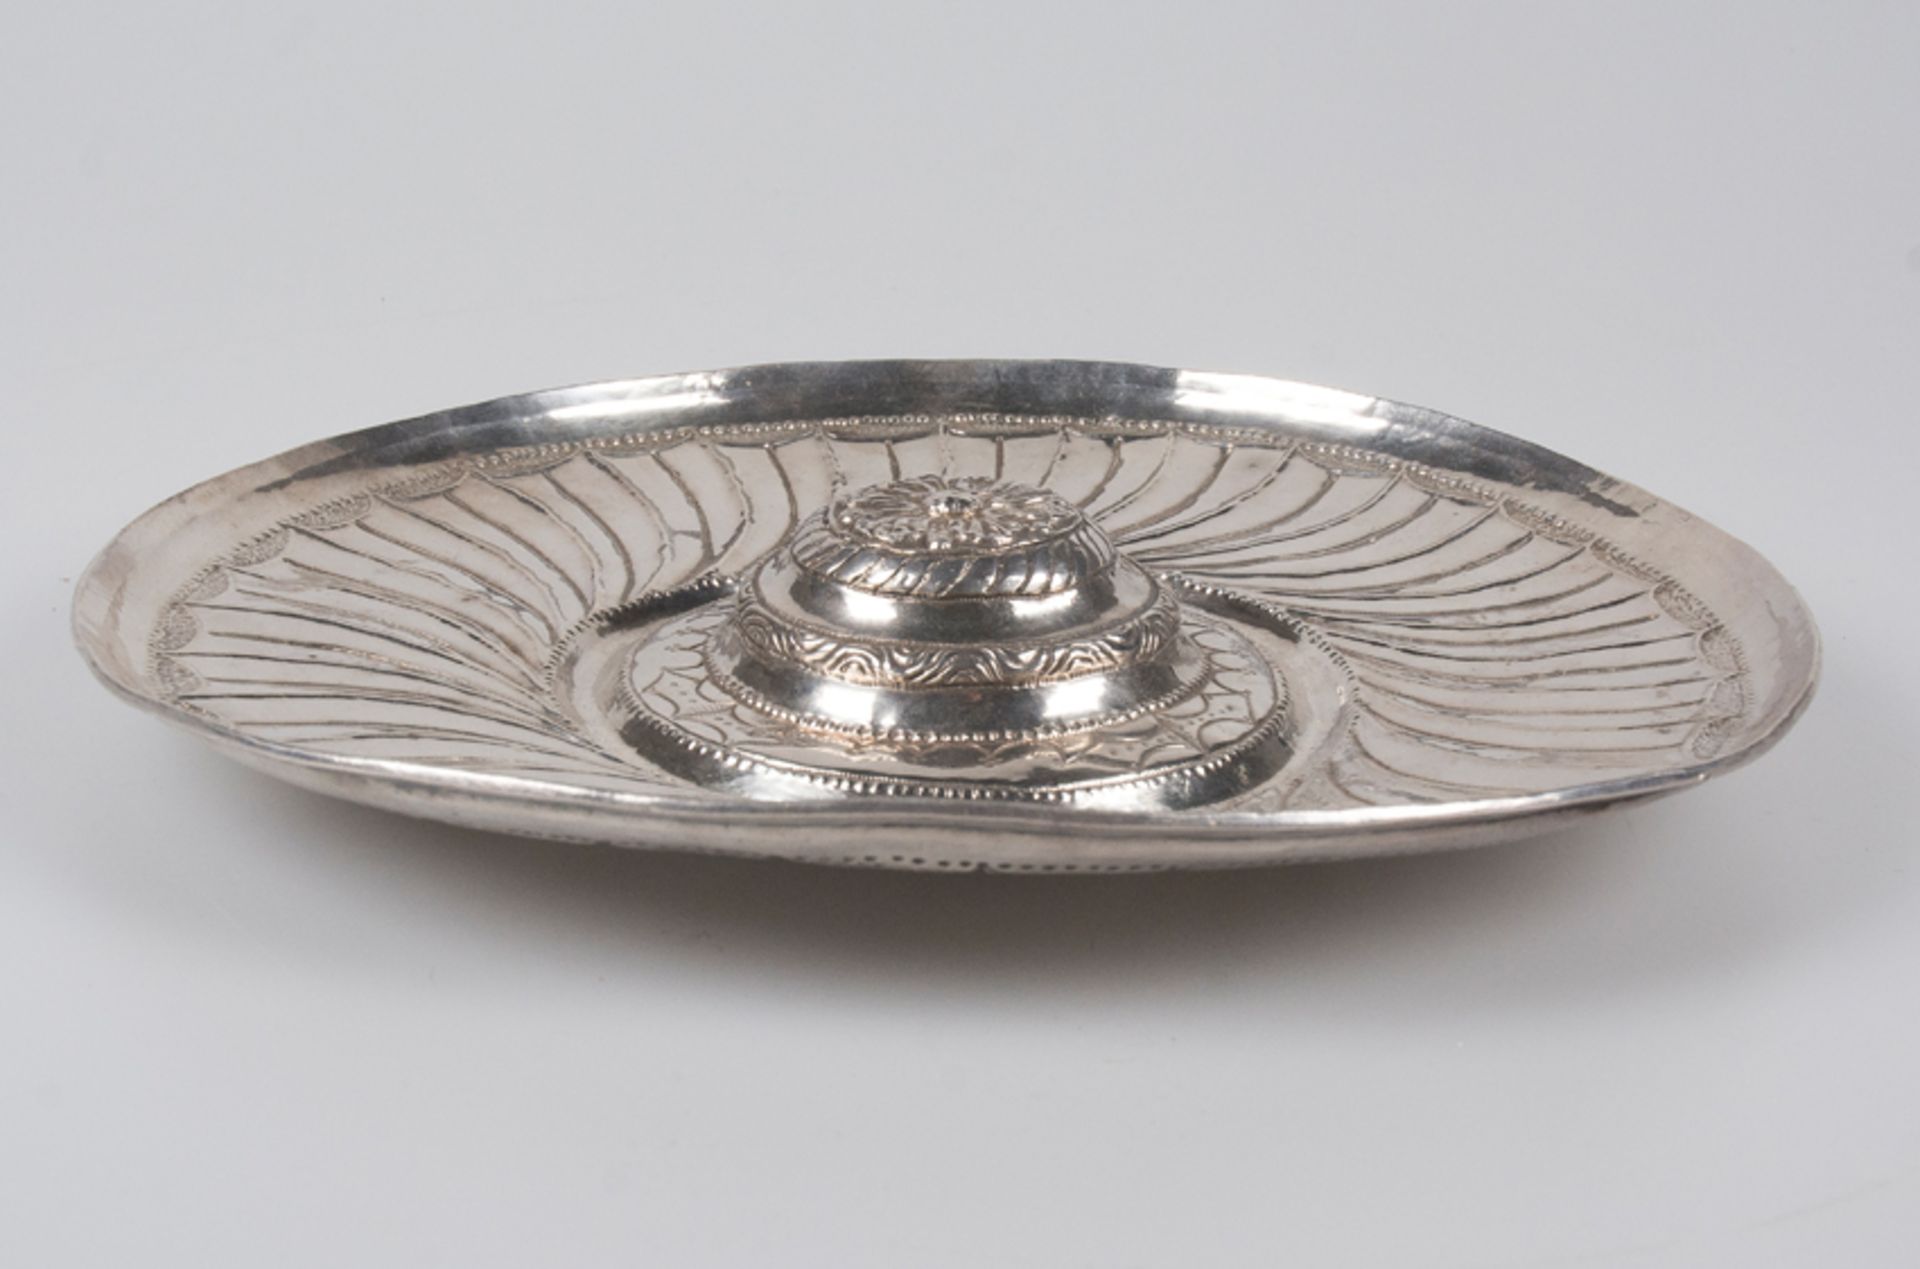 Embossed and chased Spanish silver tray. 16th century.